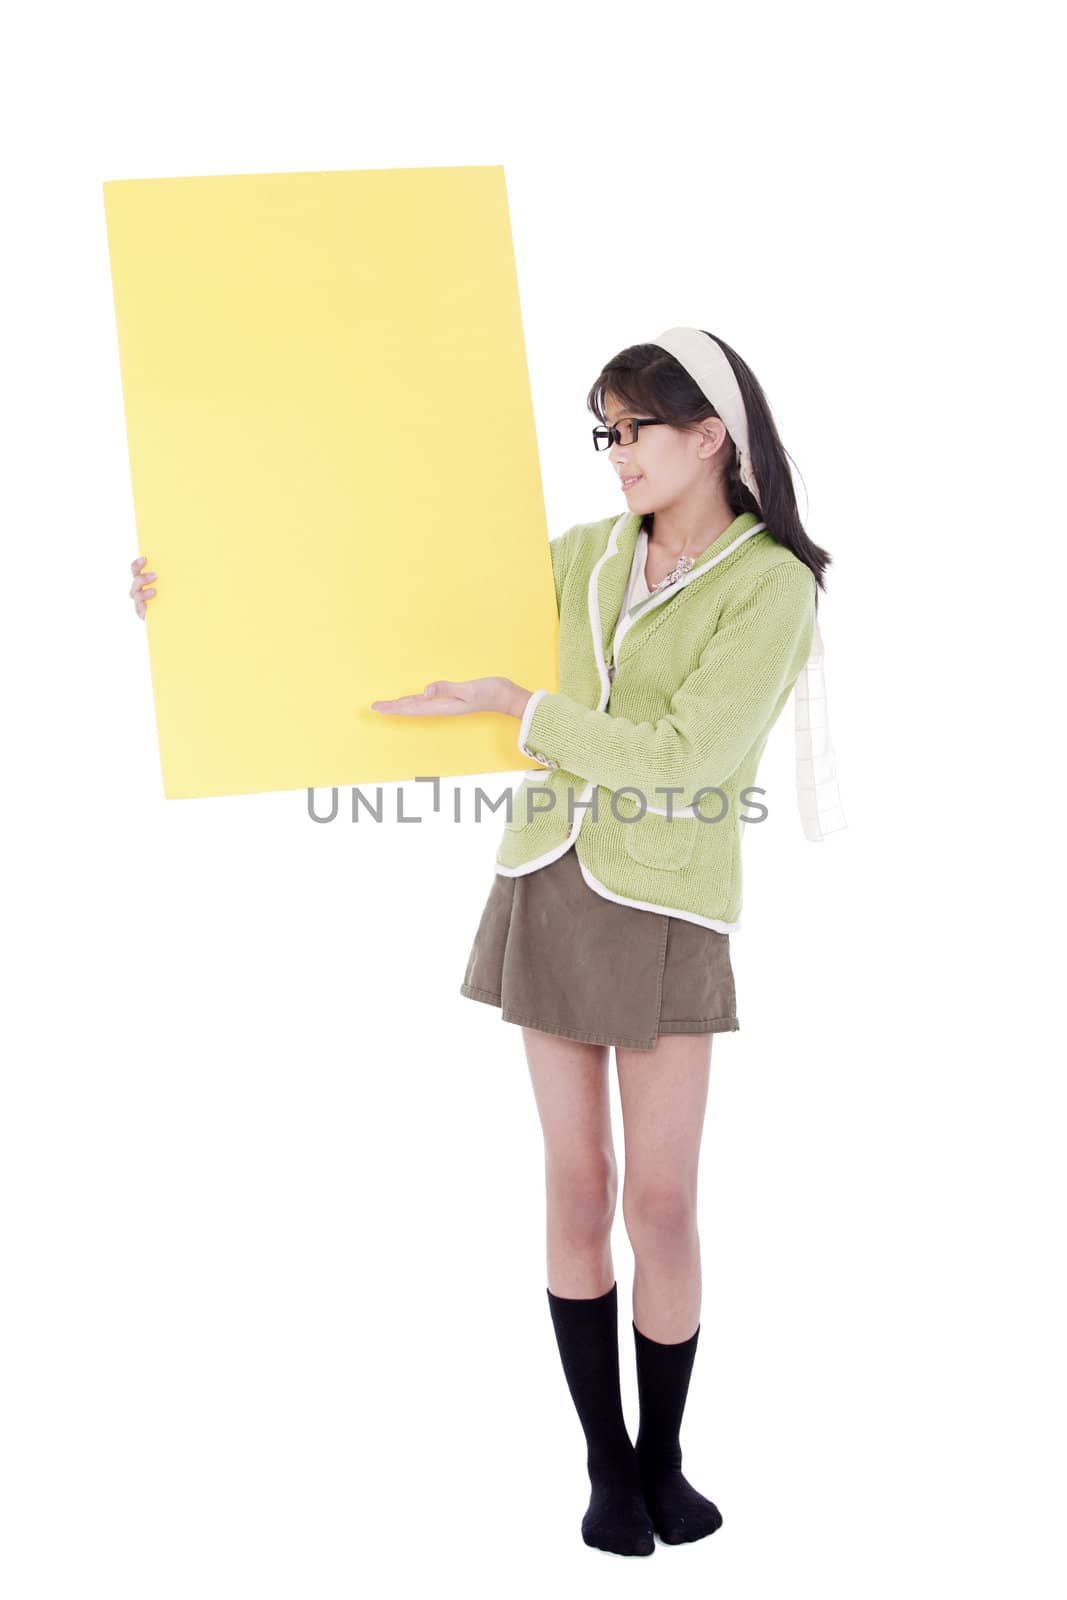 Girl in green sweater and glasses gesturing to a blank yellow si by jarenwicklund